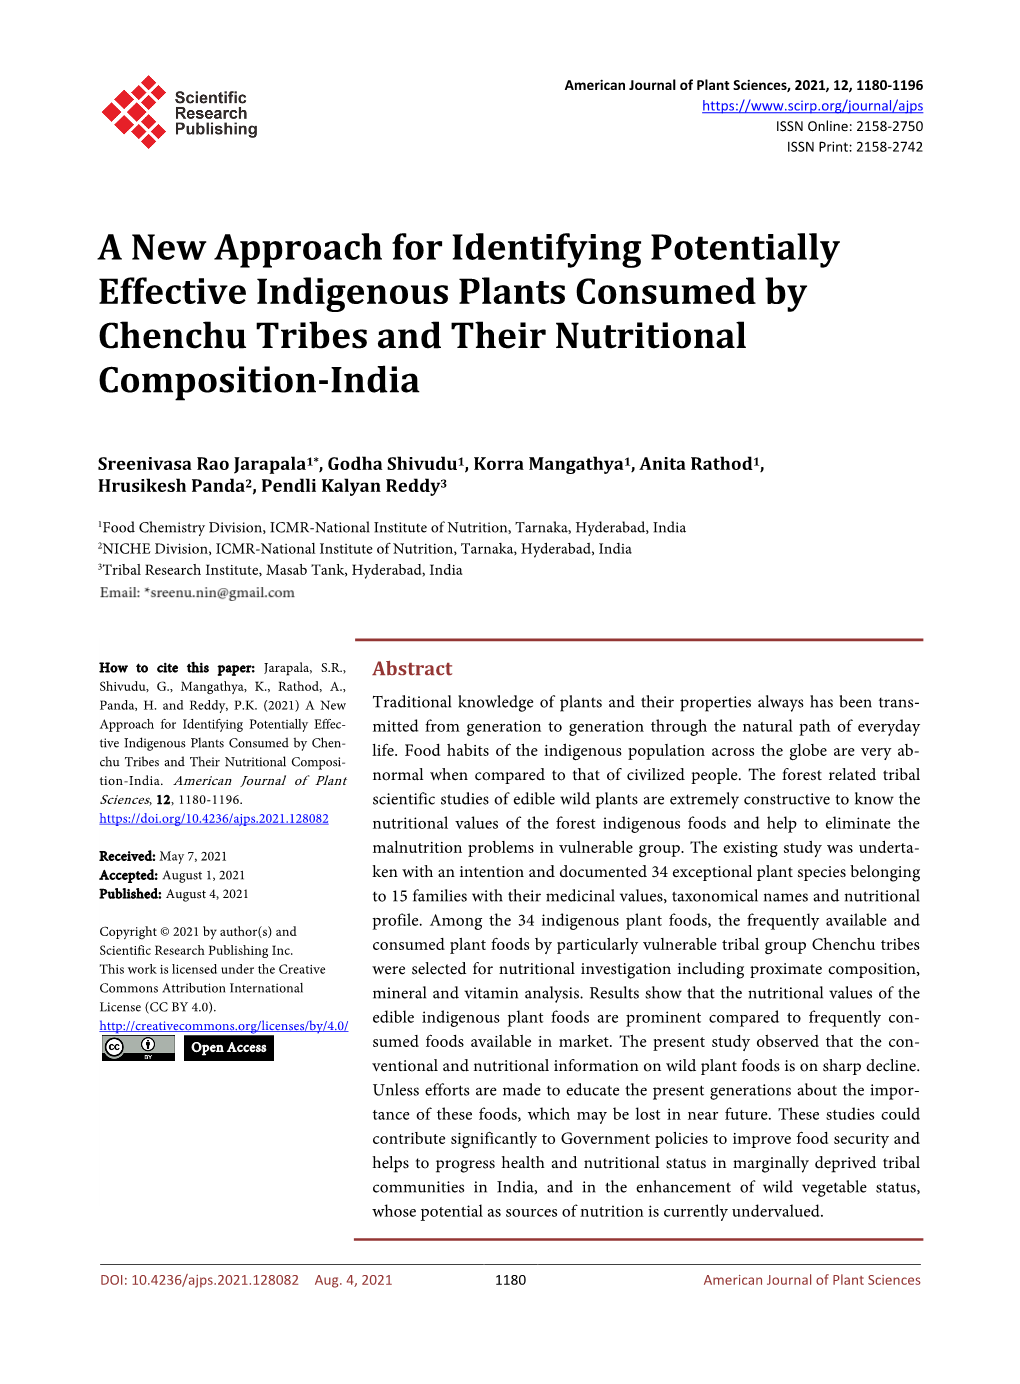 A New Approach for Identifying Potentially Effective Indigenous Plants Consumed by Chenchu Tribes and Their Nutritional Composition-India